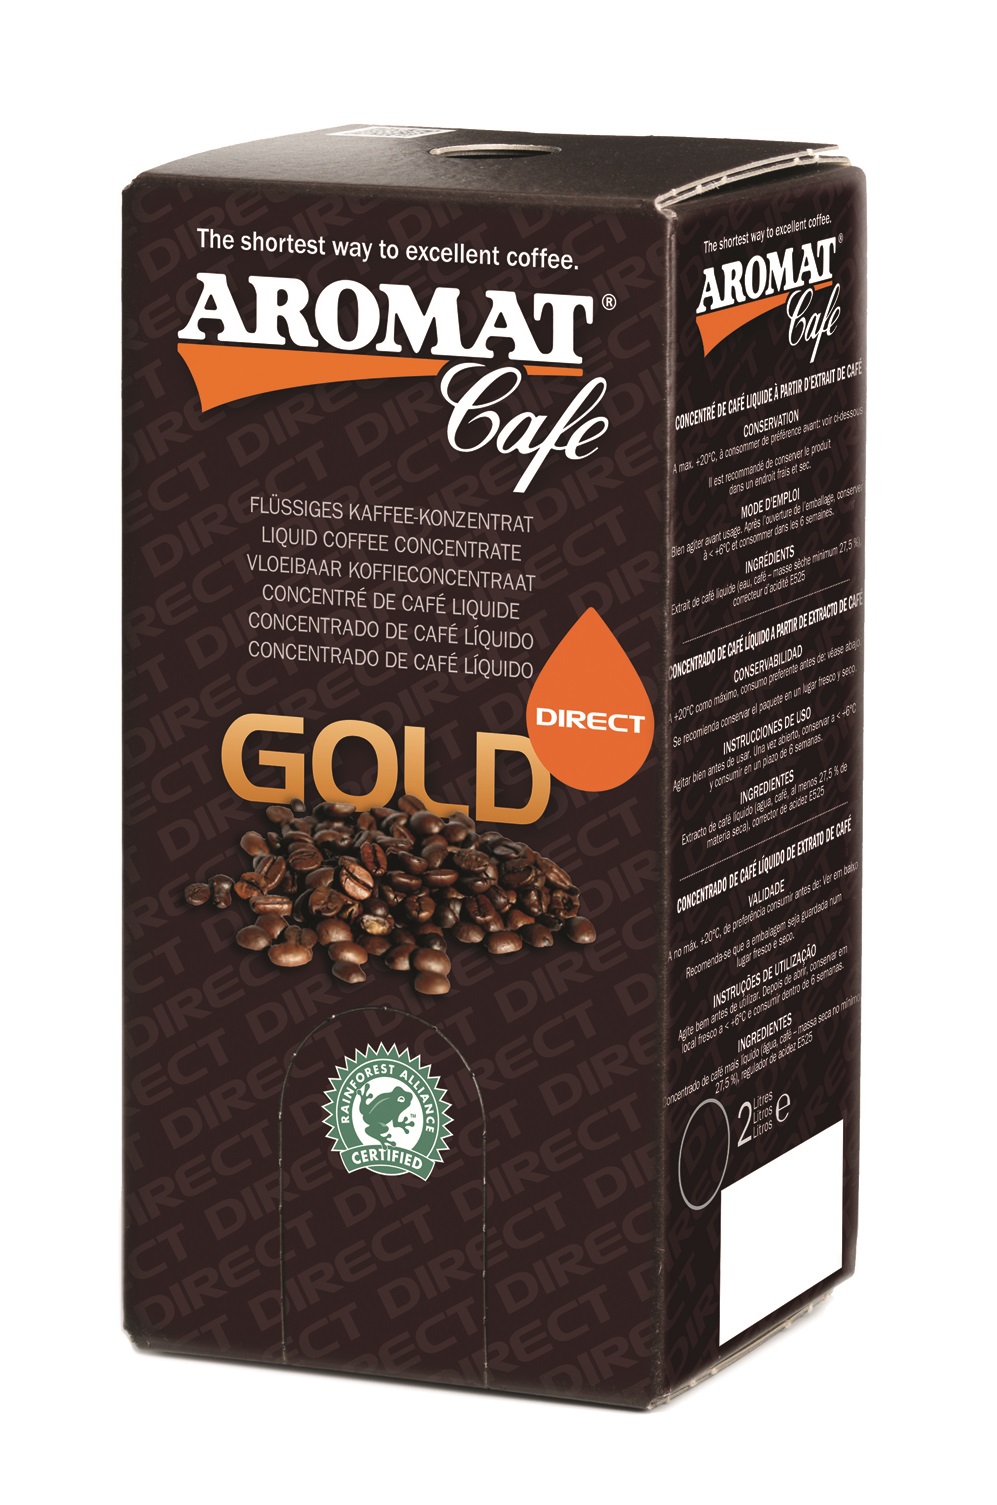 AROMAT Cafe GOLD DIRECT